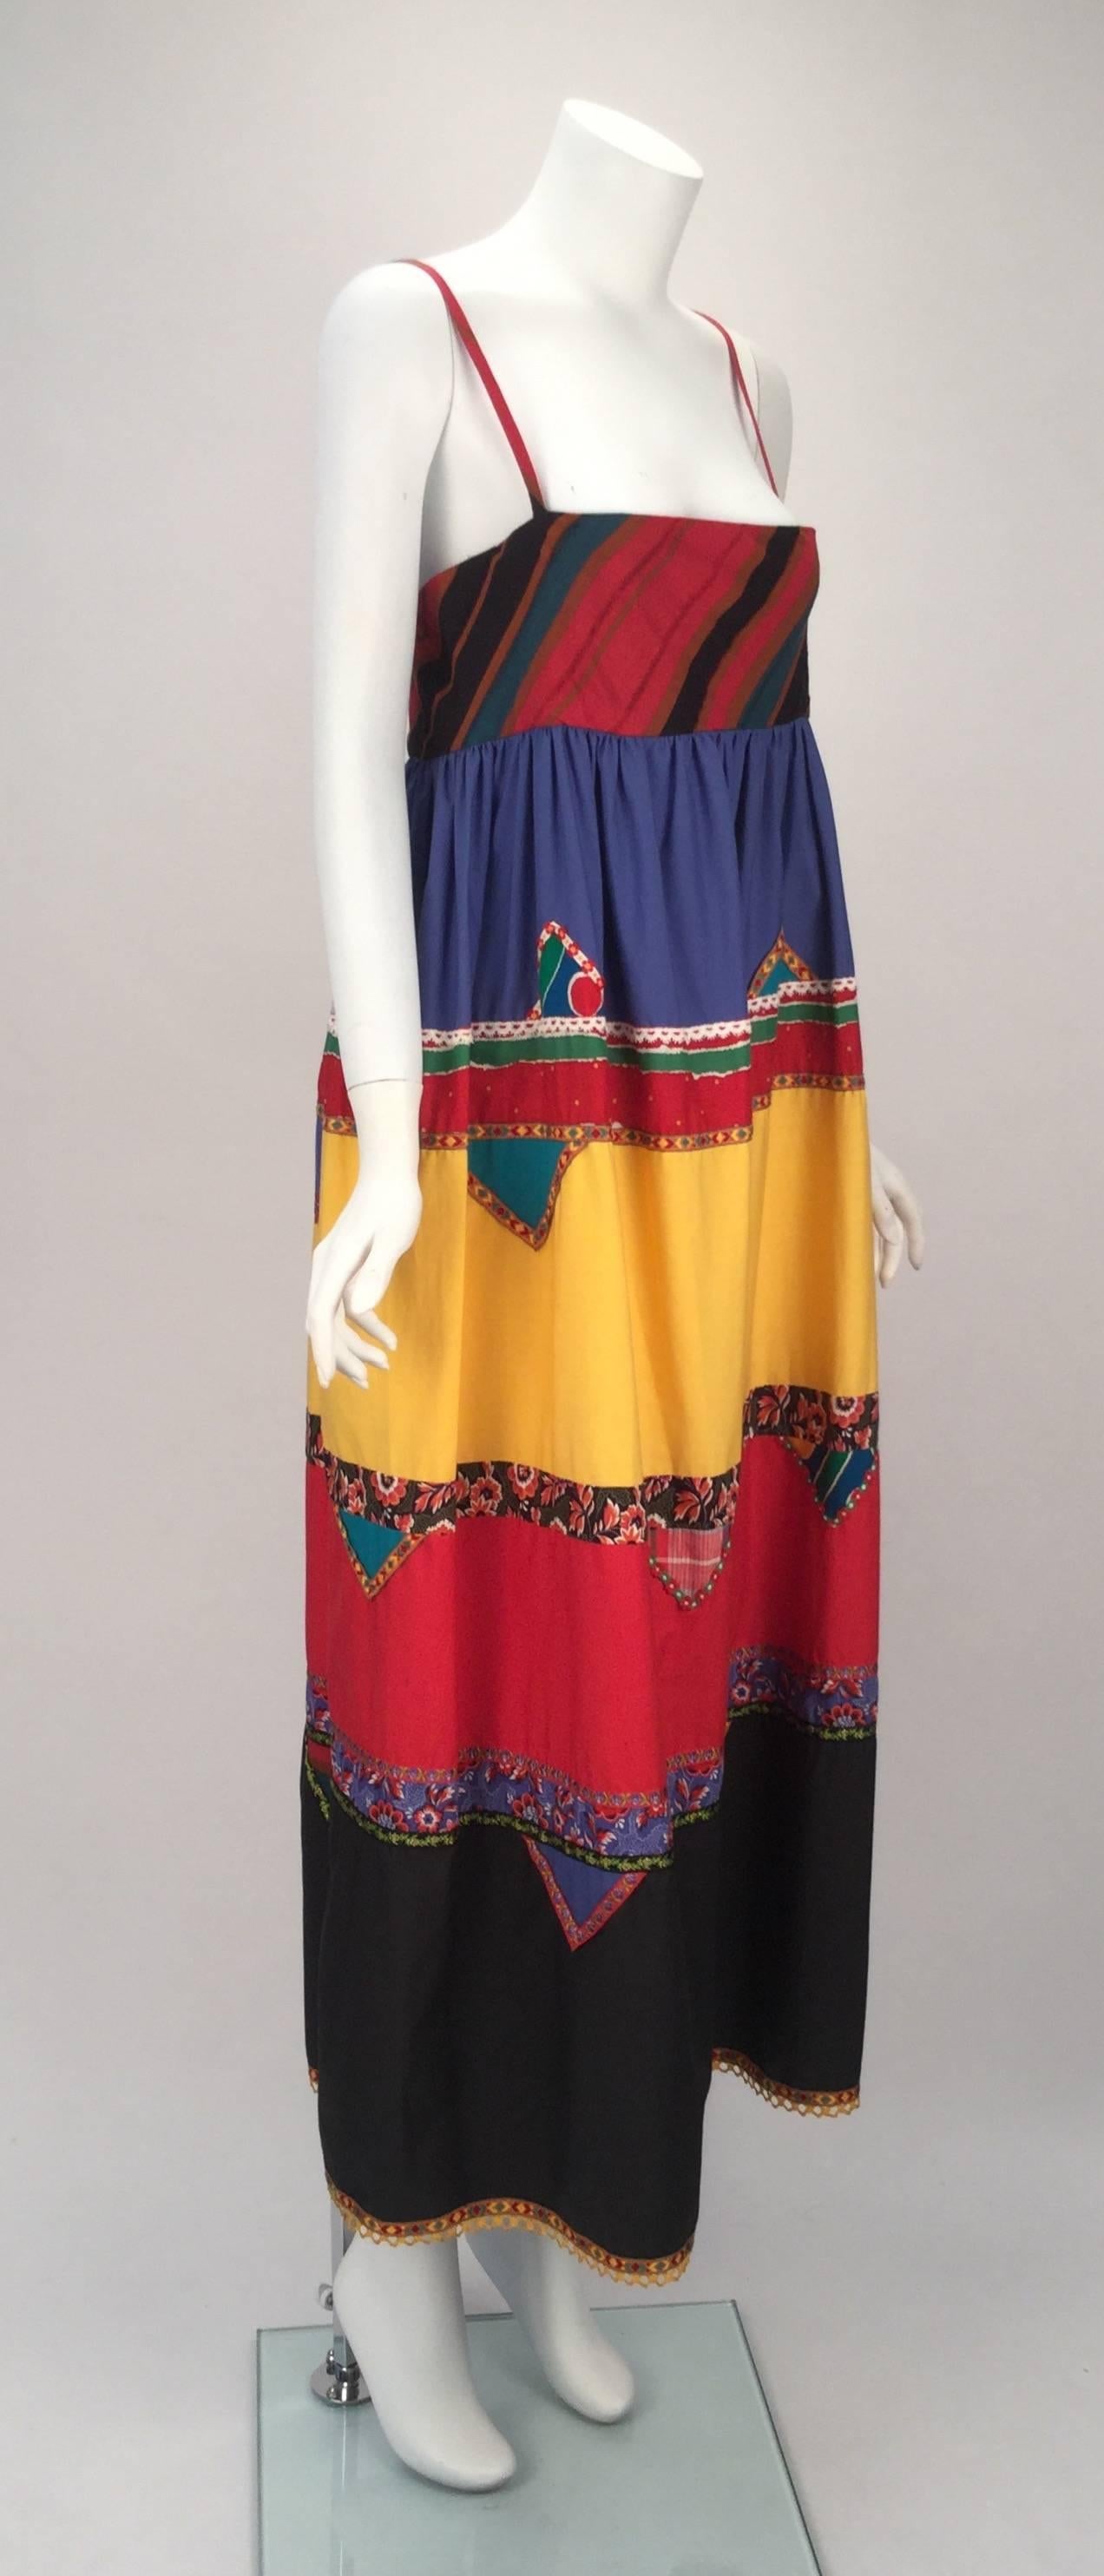 1980s Giorgio Sant' Angelo empire waist, sleeveless dress with bright color and print blocking.  As was his natural inclination,  Sant' Angelo reference the American Indian in his use of colorful mix of trim to border each color blocked shape.   It